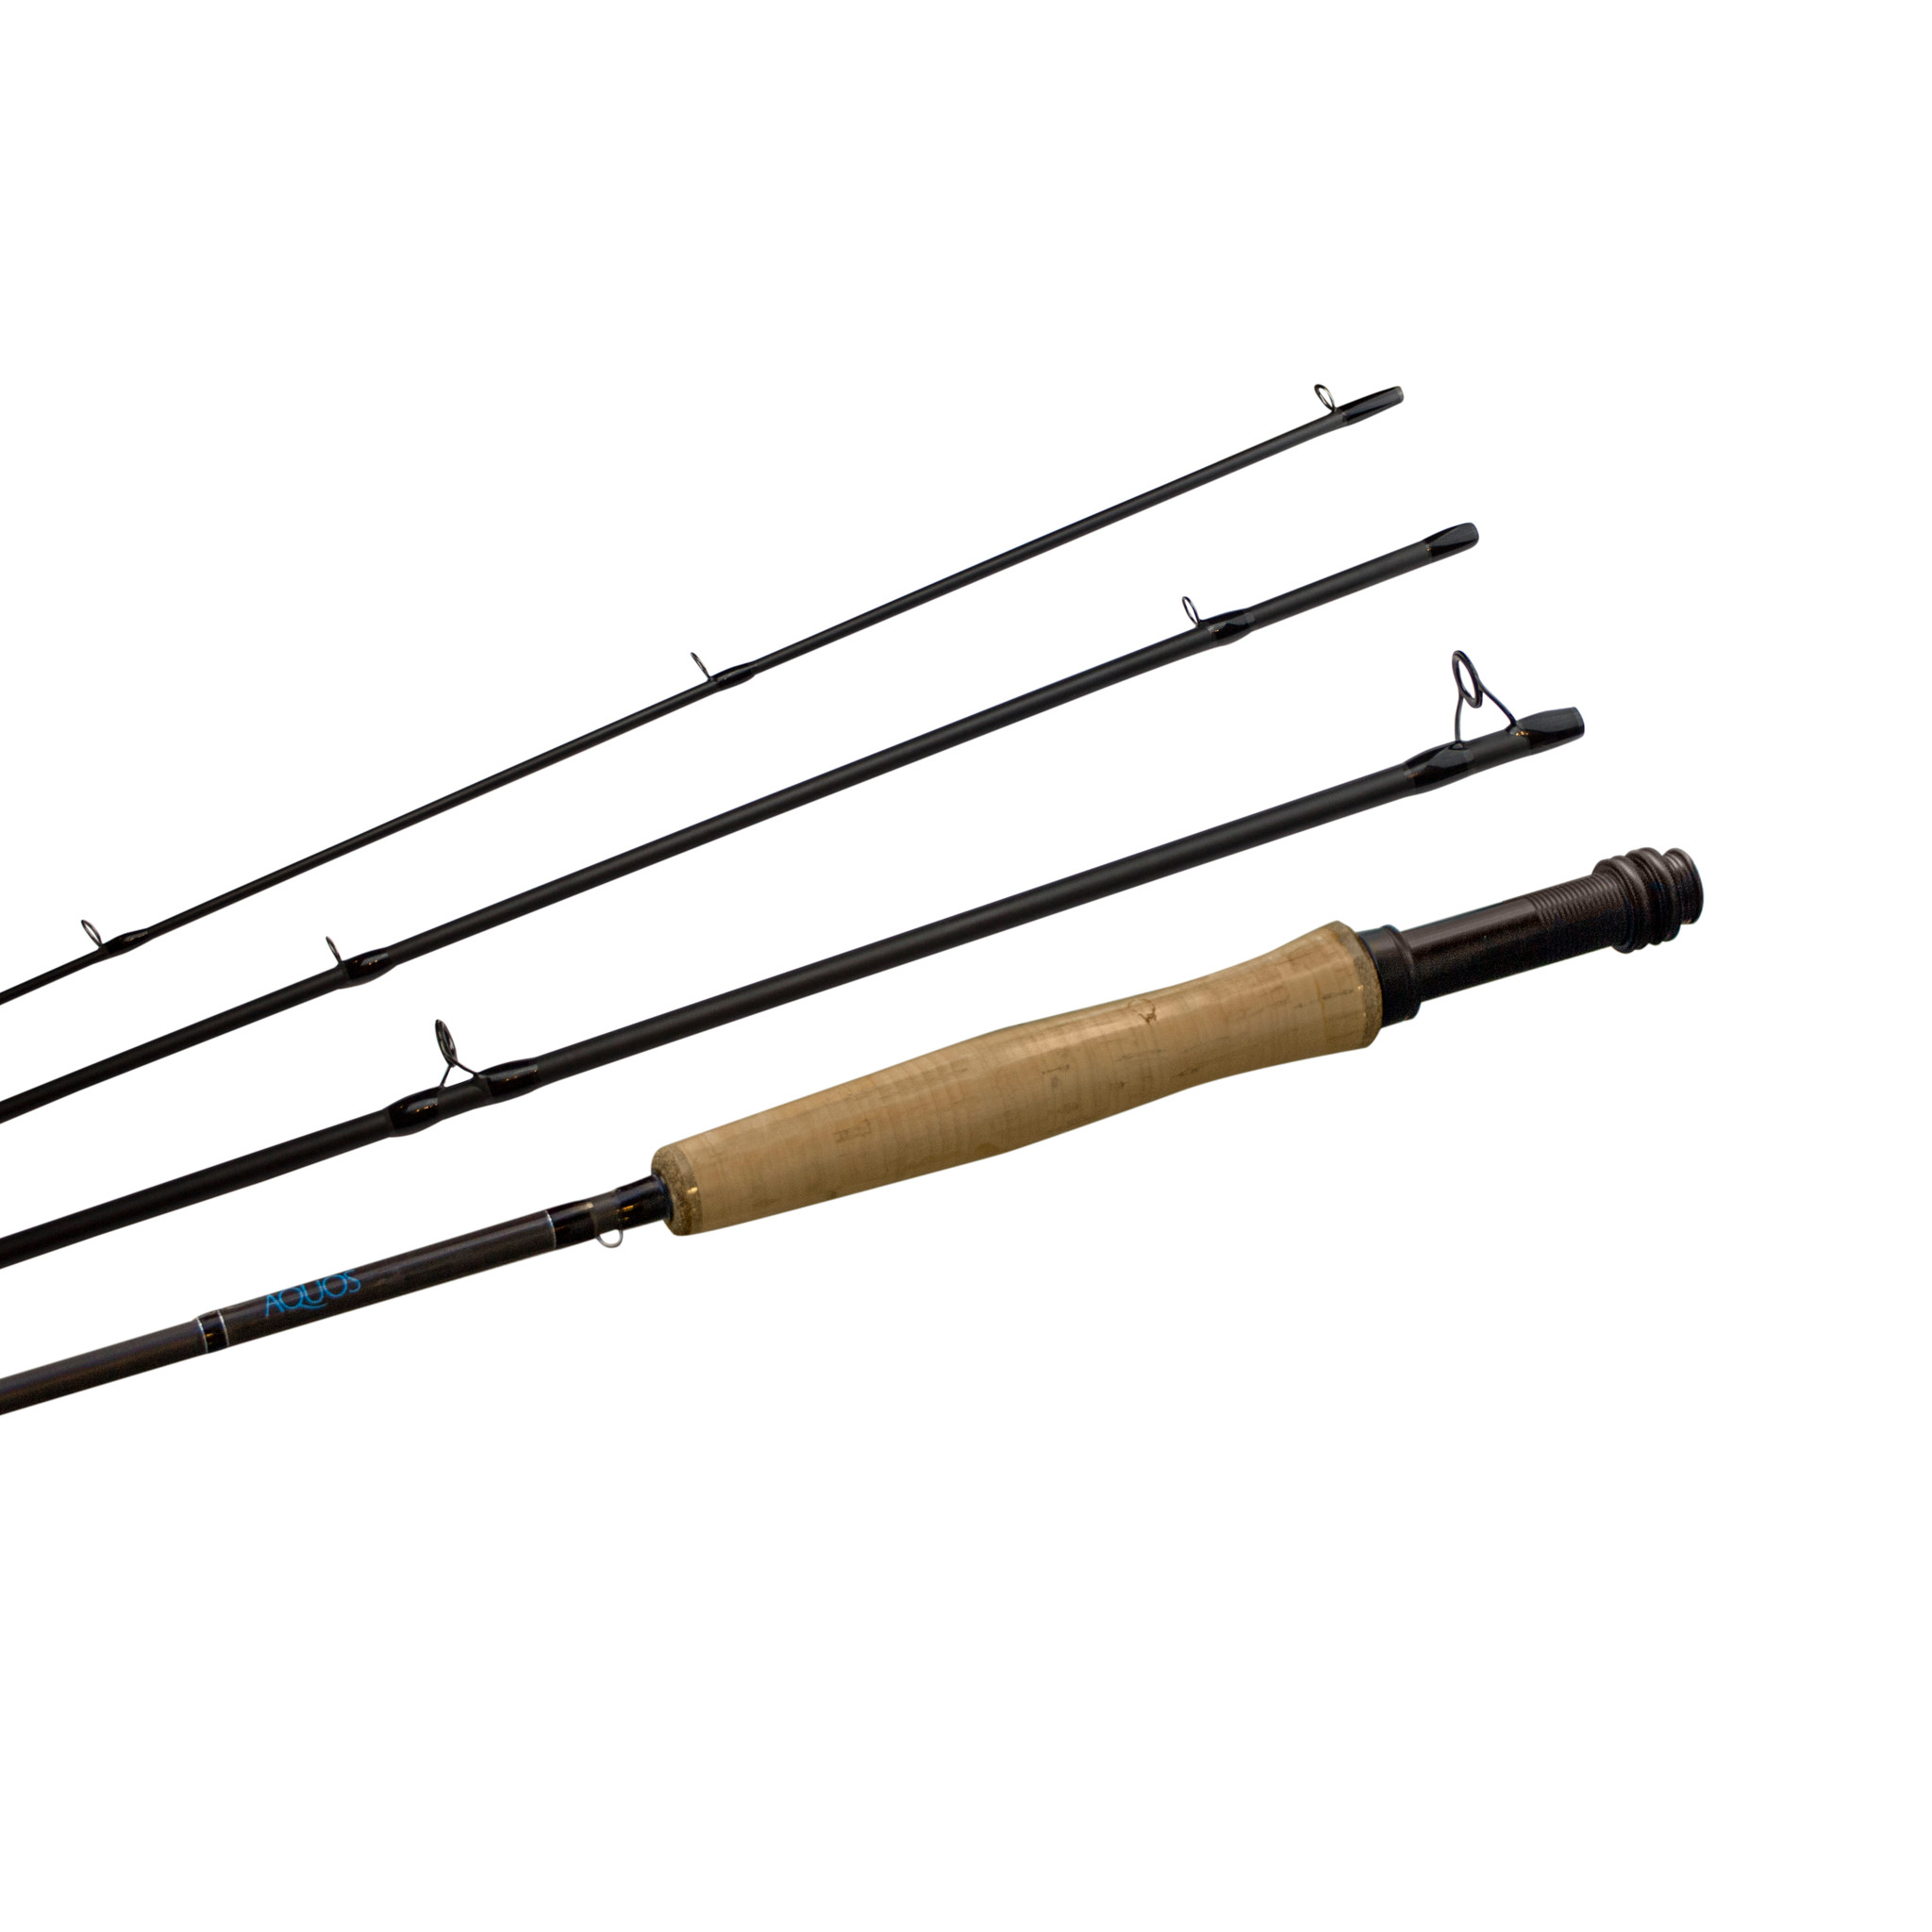 Wild Water Fly Fishing 7 Foot, 4-Piece, 3/4 Weight Fly Rod